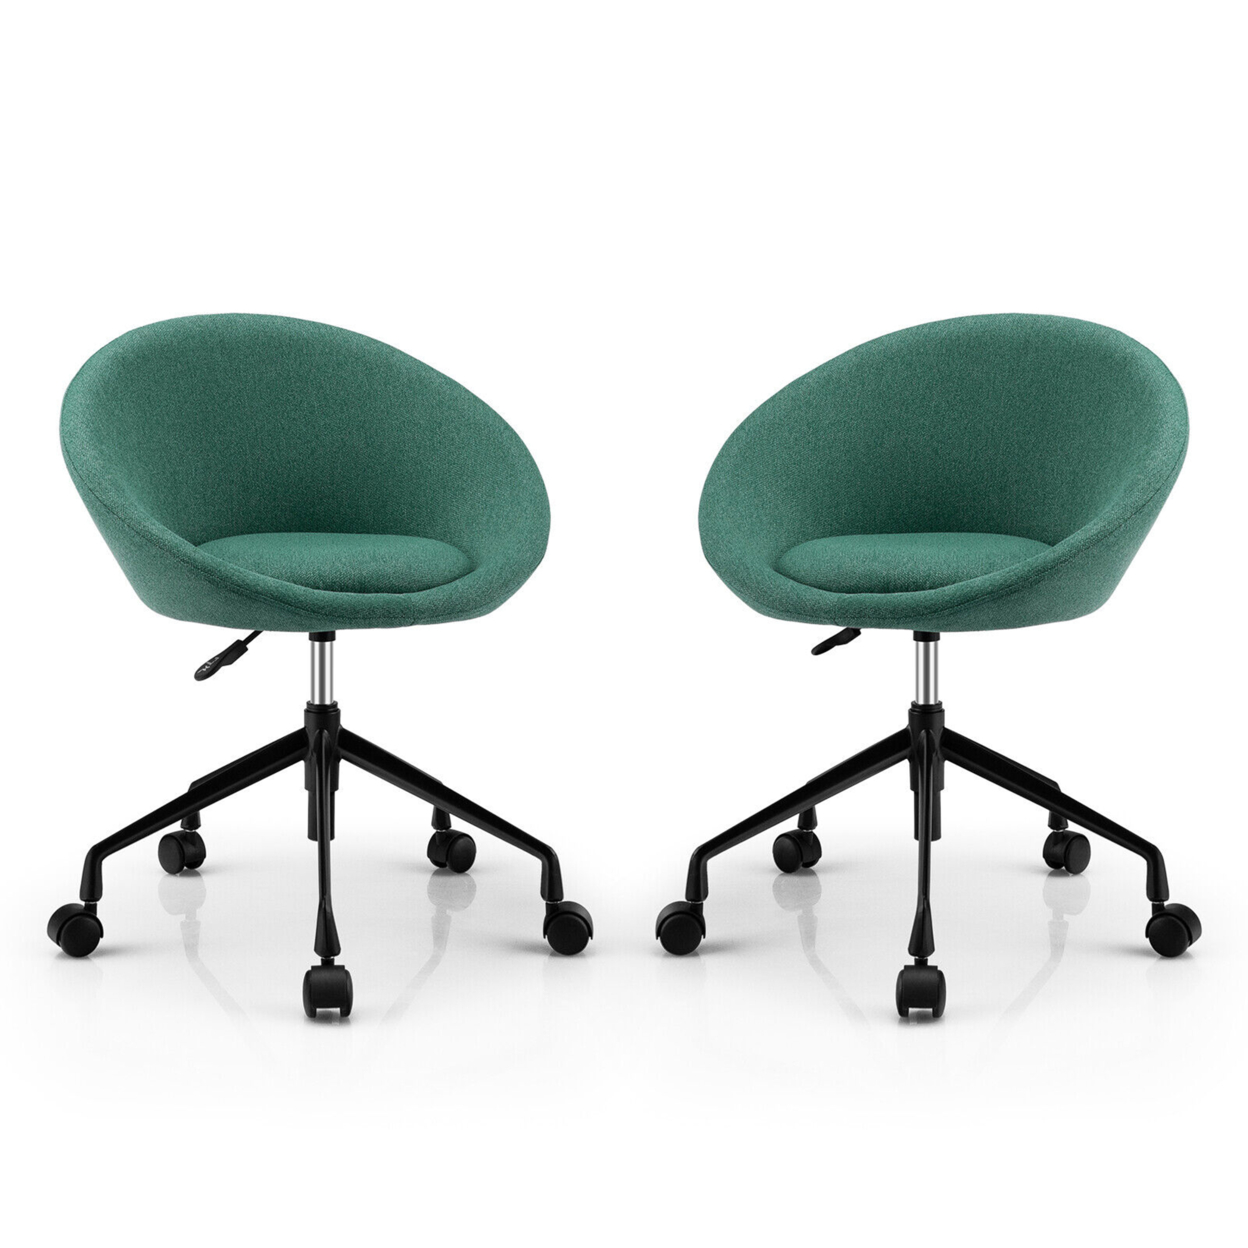 Set Of 2 Swivel Home Office Chair Adjustable Accent Chair W/ Flexible Casters - Green